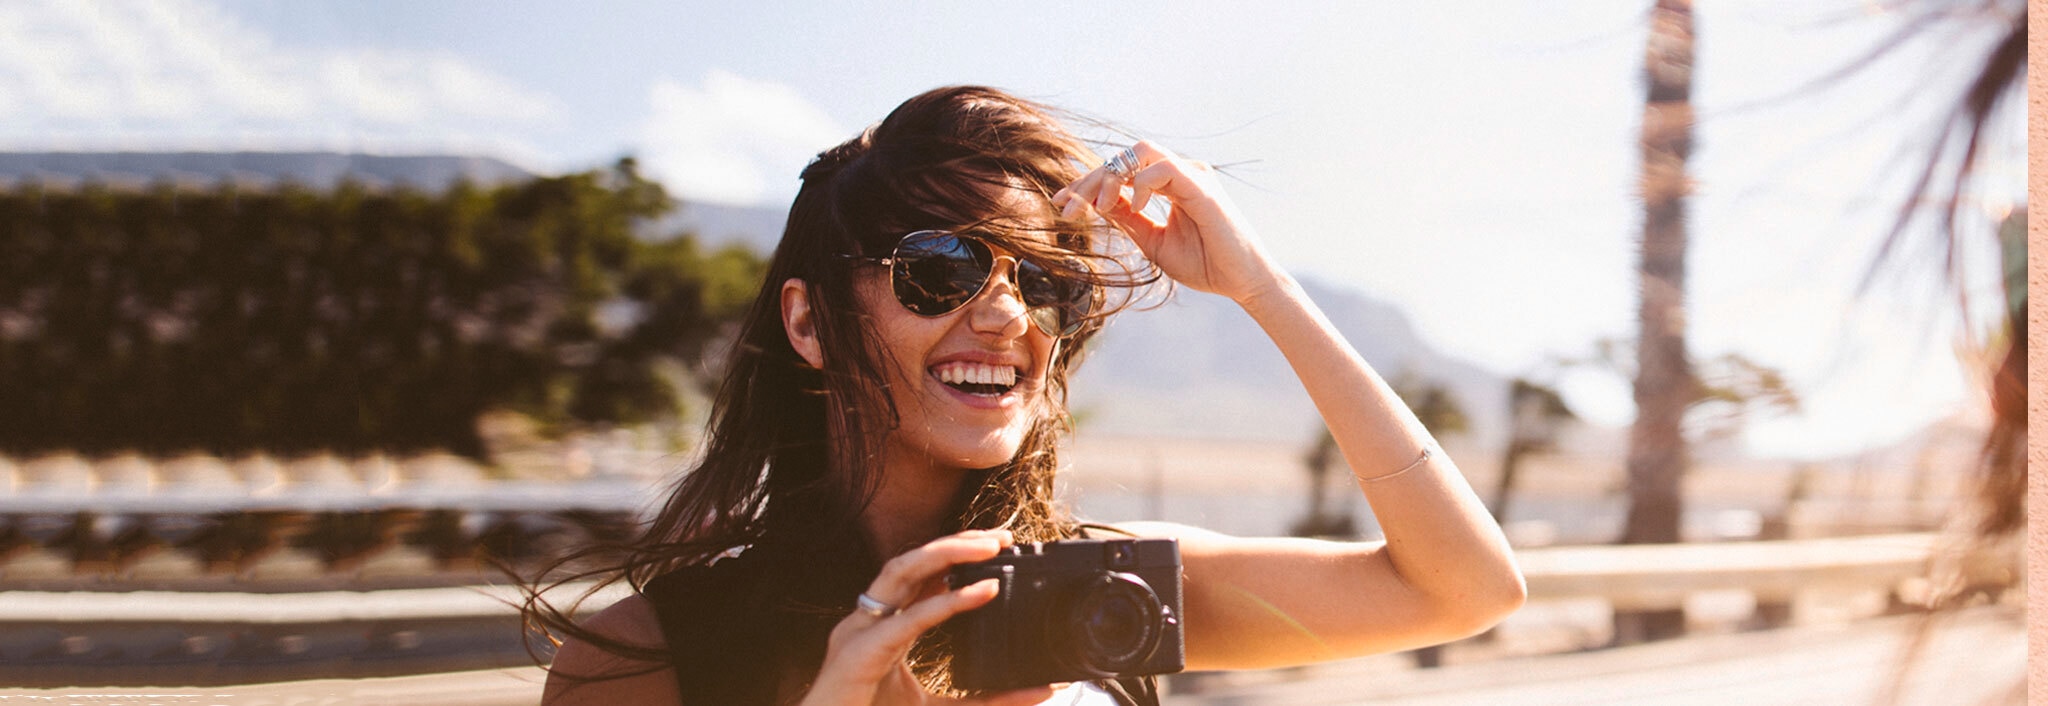 A woman standing on a beach and holding a camera, laughing as the wind blows her brown hair into her face.